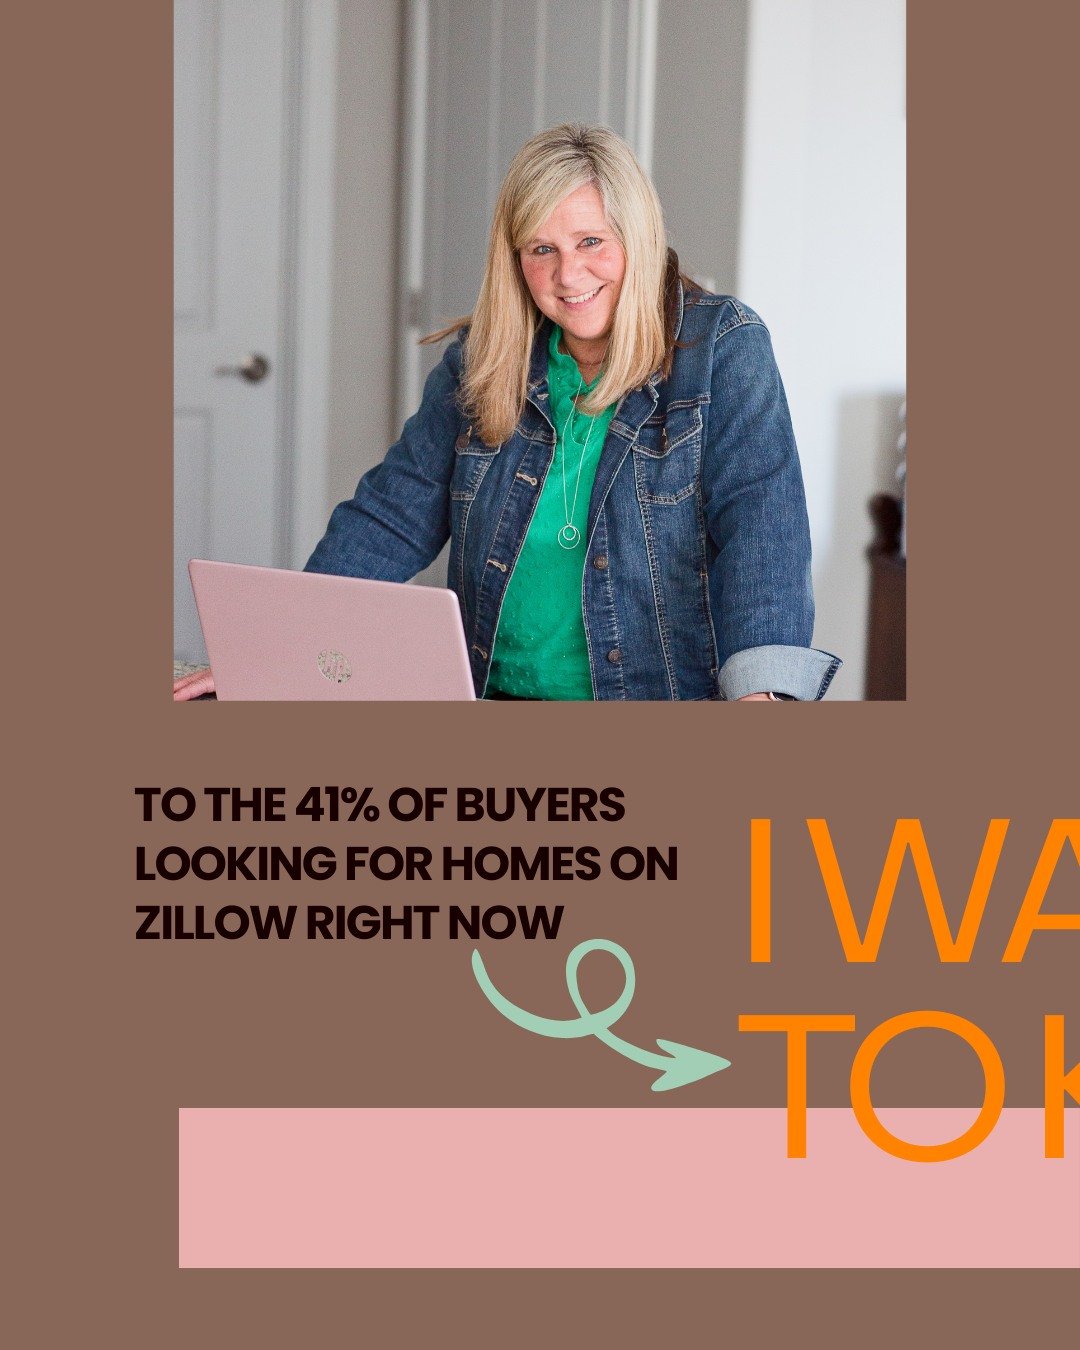 This is where *ahem* I come in.

The National Association of Realtors (NAR) recently released a stat that 41% of buyers started their home buying journey by looking at homes online.

I'm honestly surprised this number wasn't higher, given how easy it